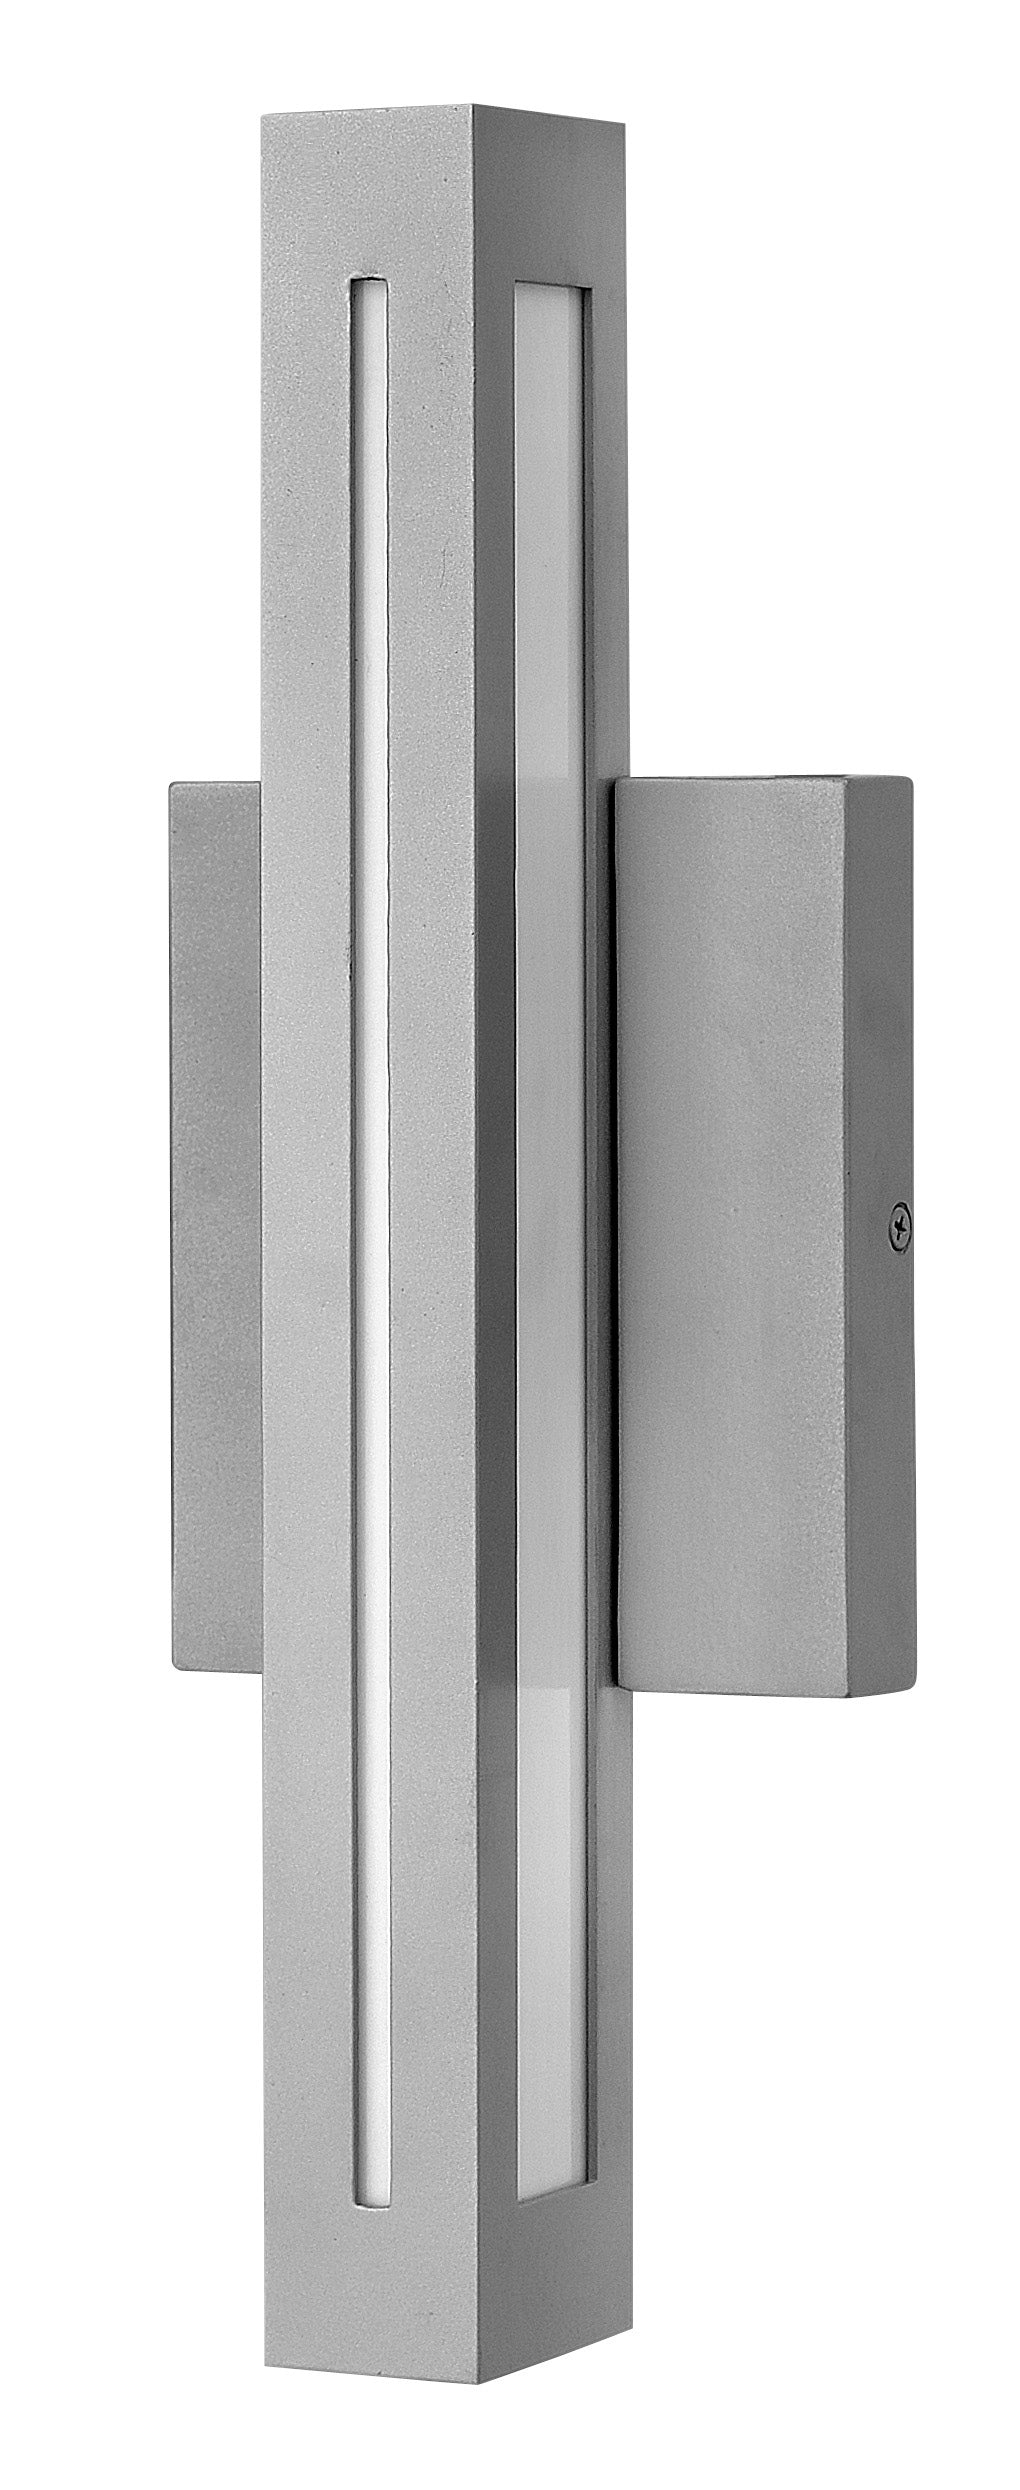 VUE Outdoor sconce Stainless steel INTEGRATED LED - 12312TT | HINKLEY